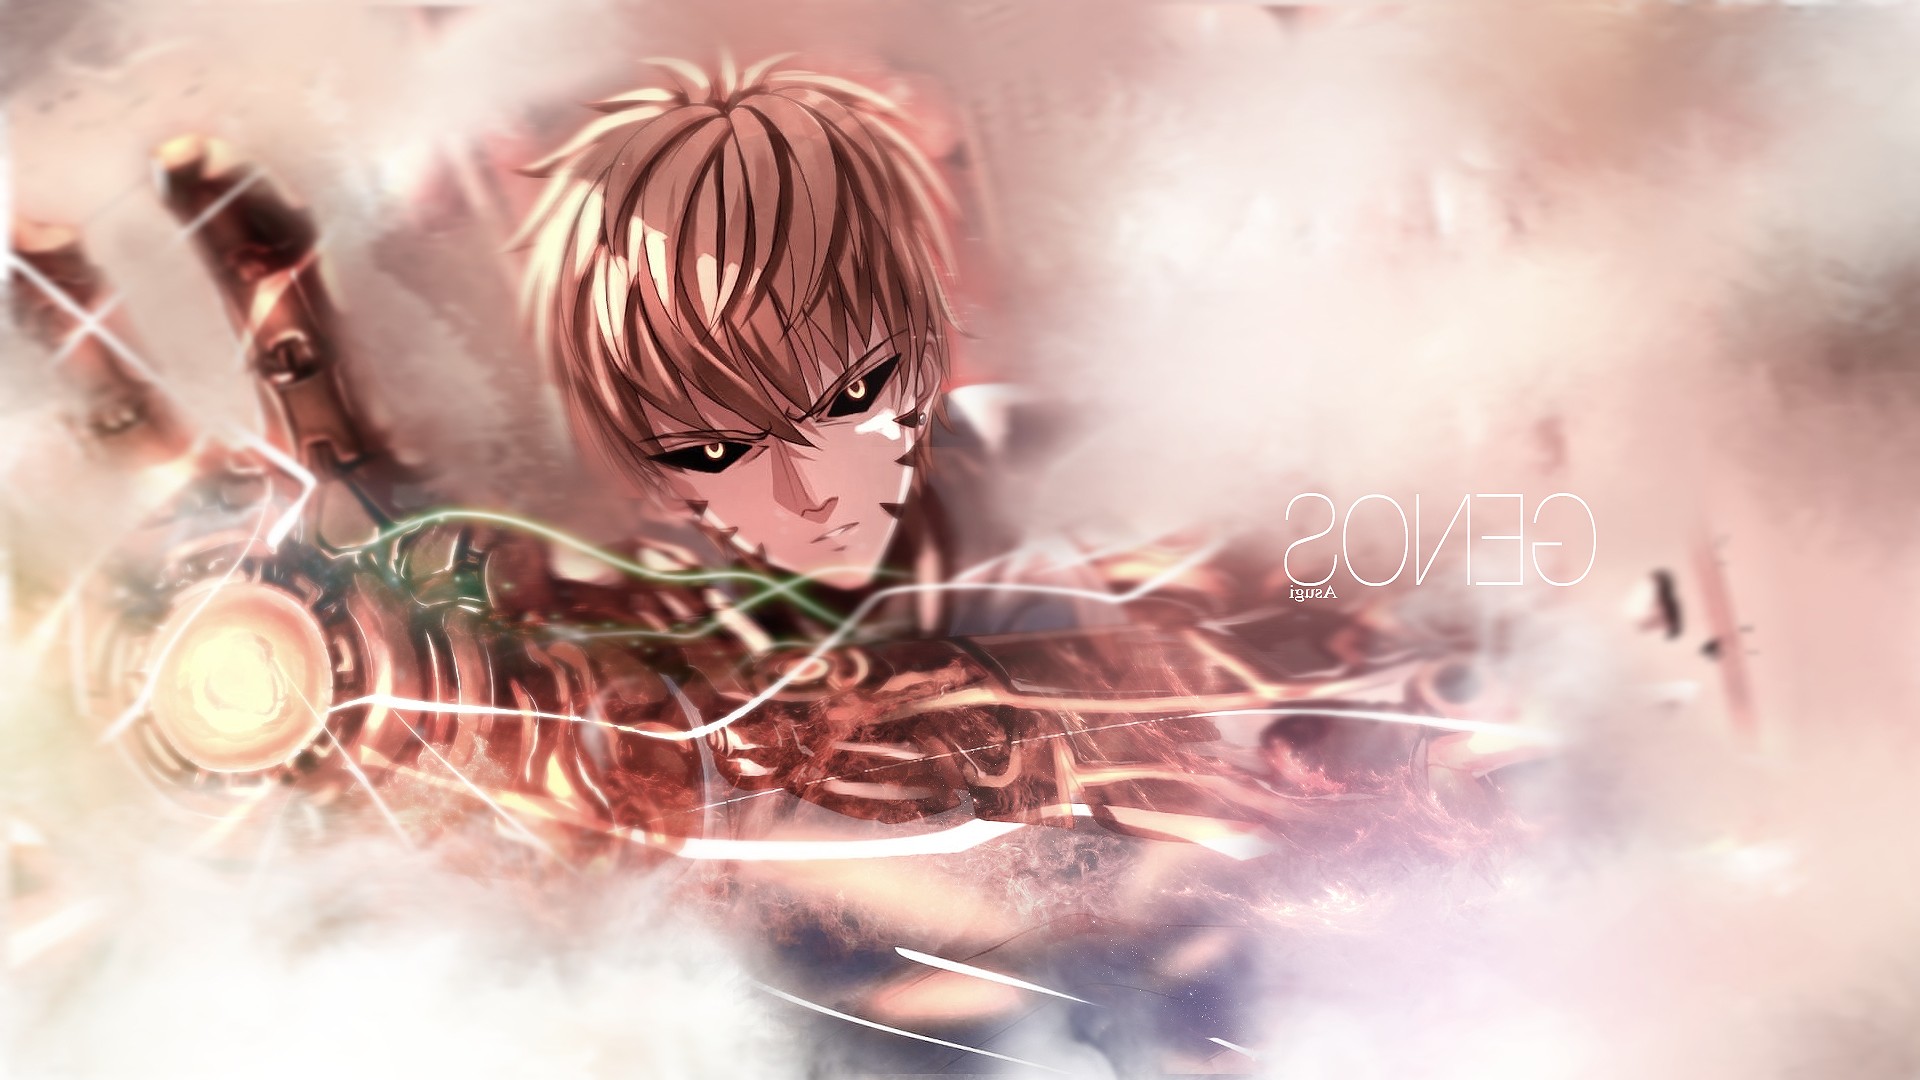 Genos wallpaper ·① Download free cool backgrounds for ...